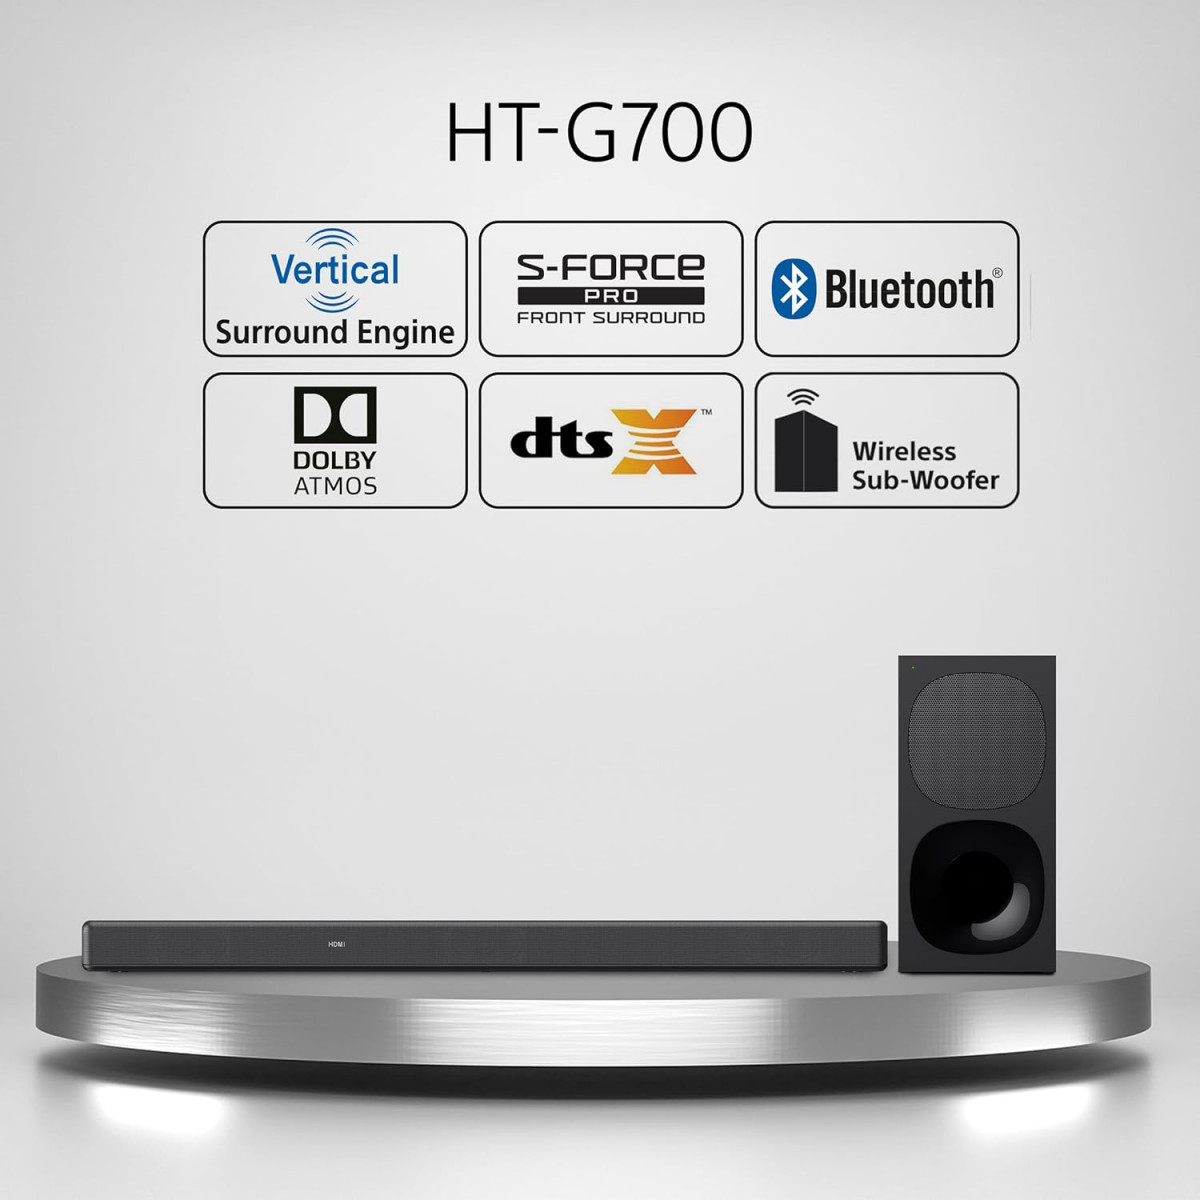 Sony HT-G700 31ch 4K Dolby AtmosDTSX Soundbar for TV with Wireless subwoofer 31ch Home Theater System 400W Surround SoundBluetooth Connectivity HDMI  Optical Connectivity 4k HDR - Black